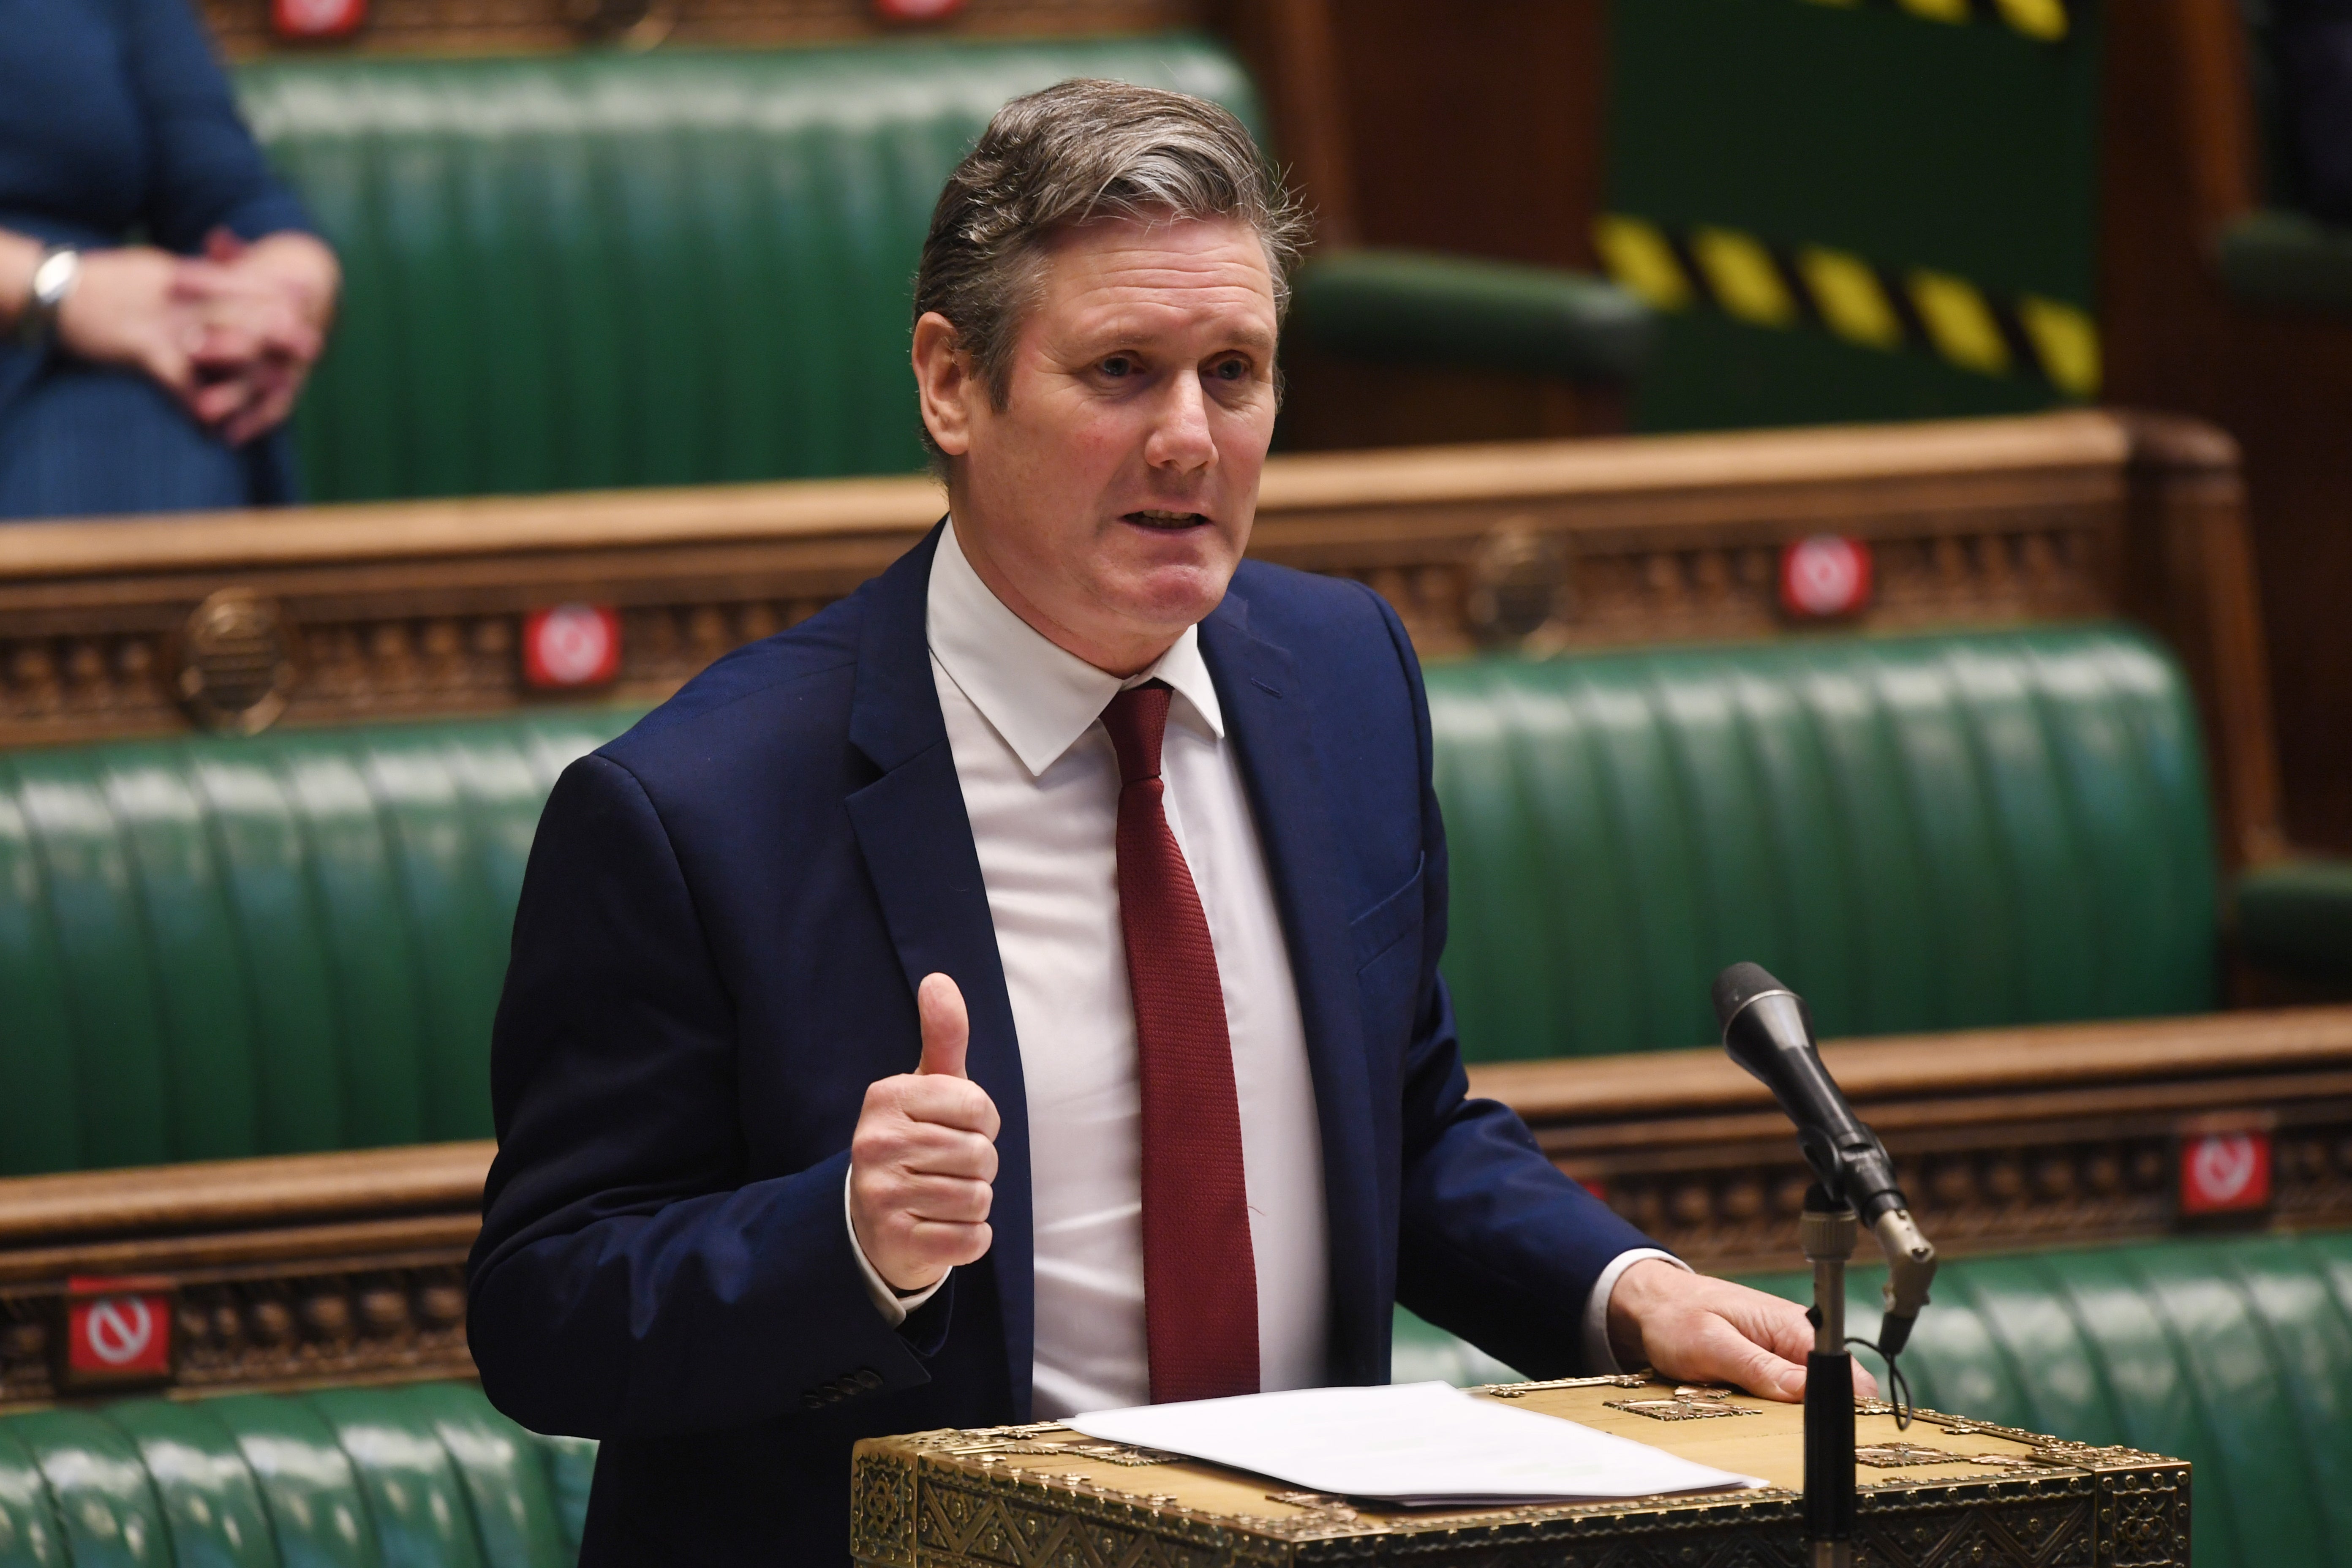 Keir Starmer campaigned for the party’s leadership on a pledge to ‘reverse the Tories’ cuts in corporation tax’